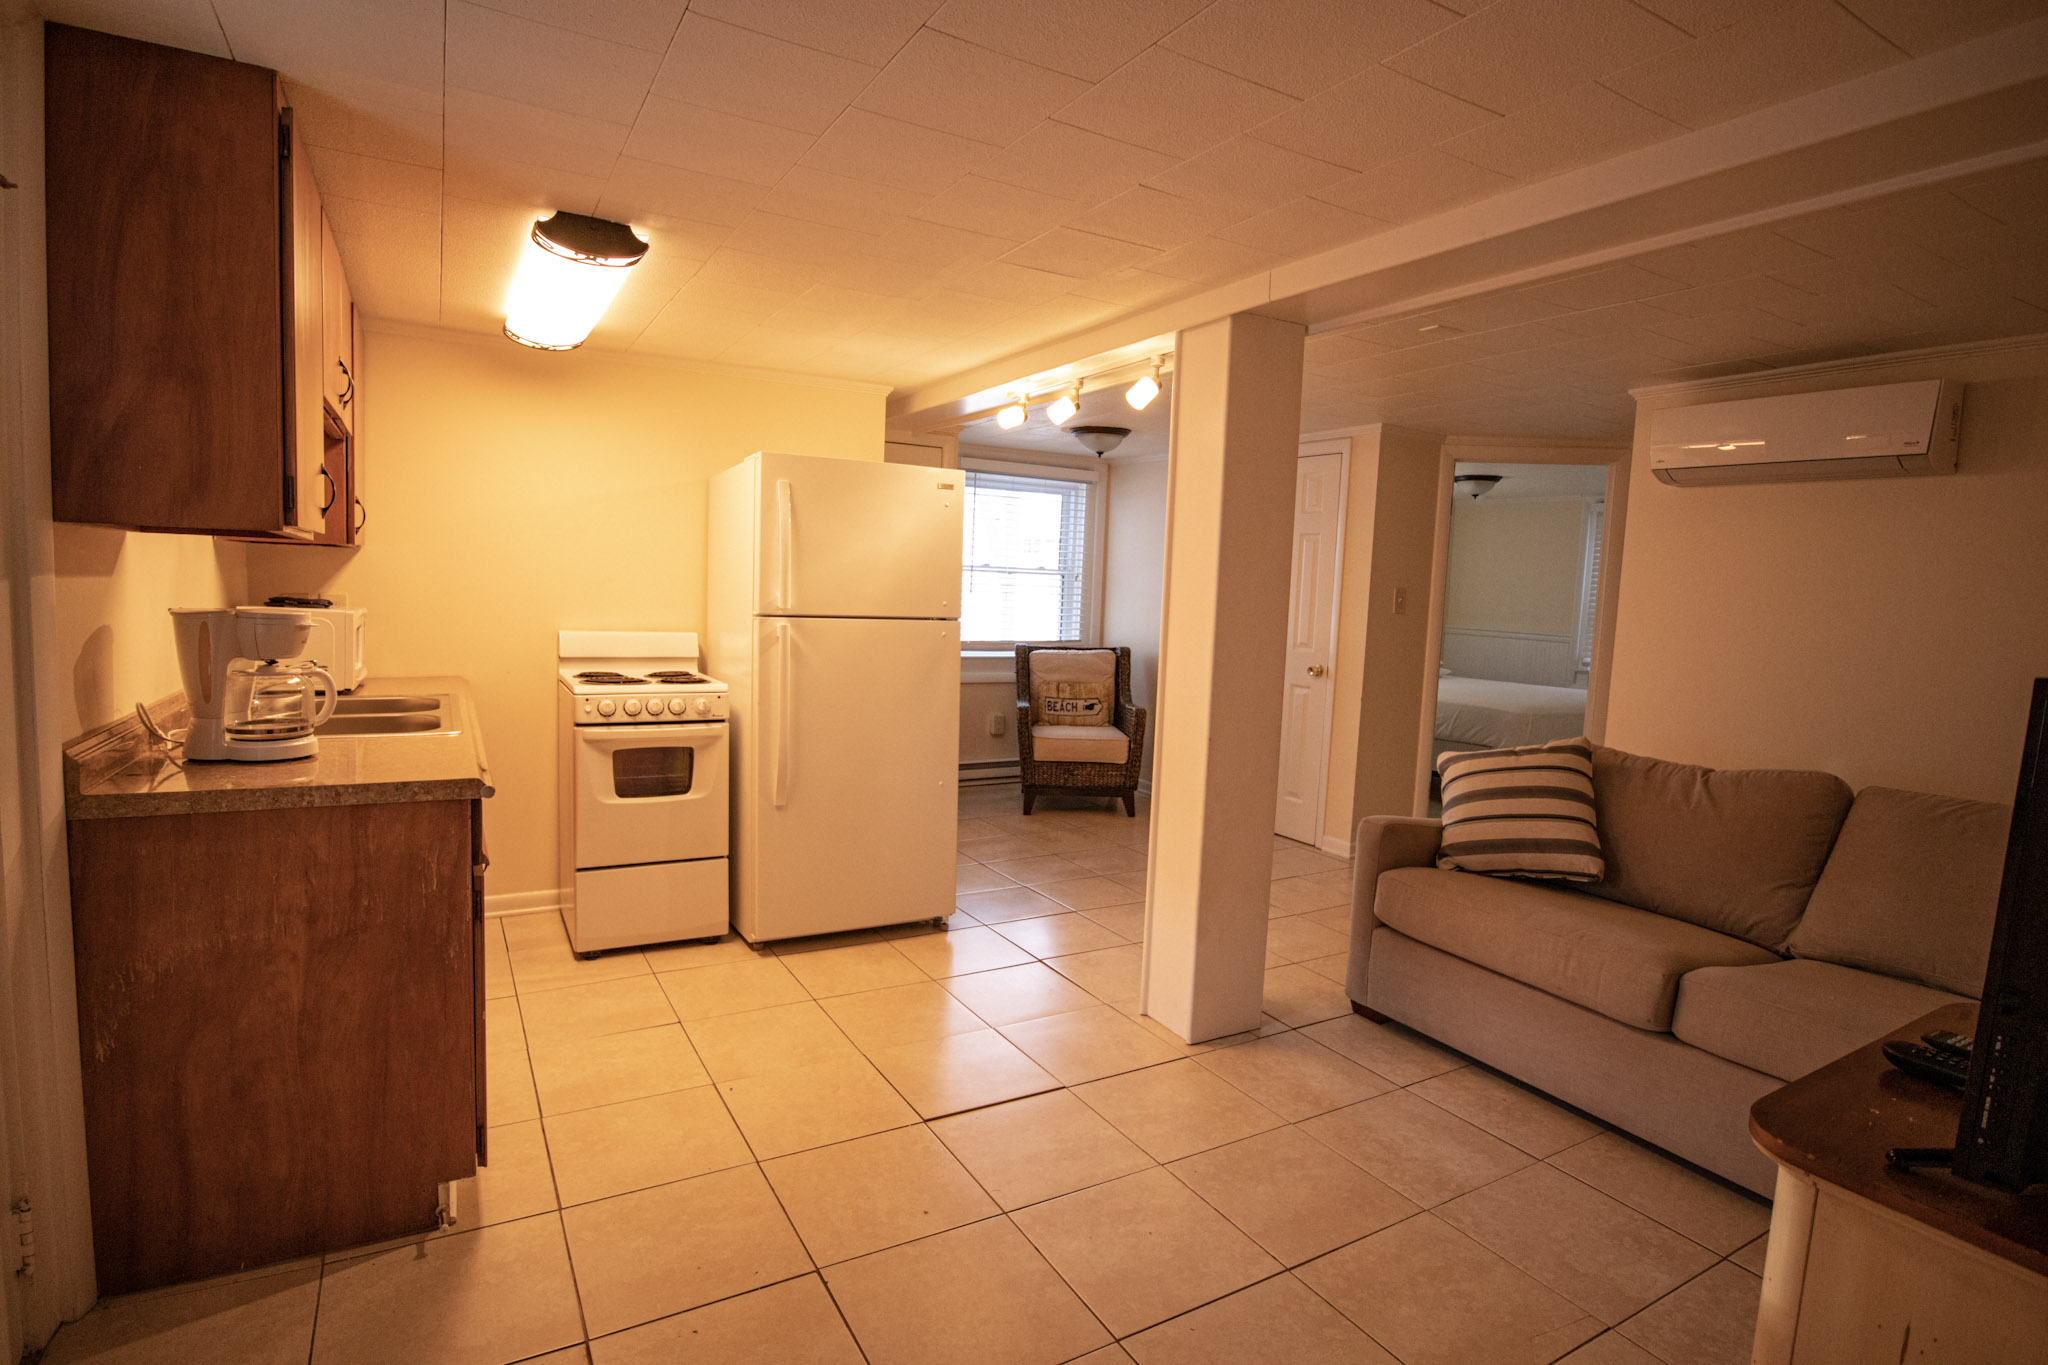 Spacious living room and kitchen in the two bedroom apartment at the Majestic Hotel in Ocean City, Maryland